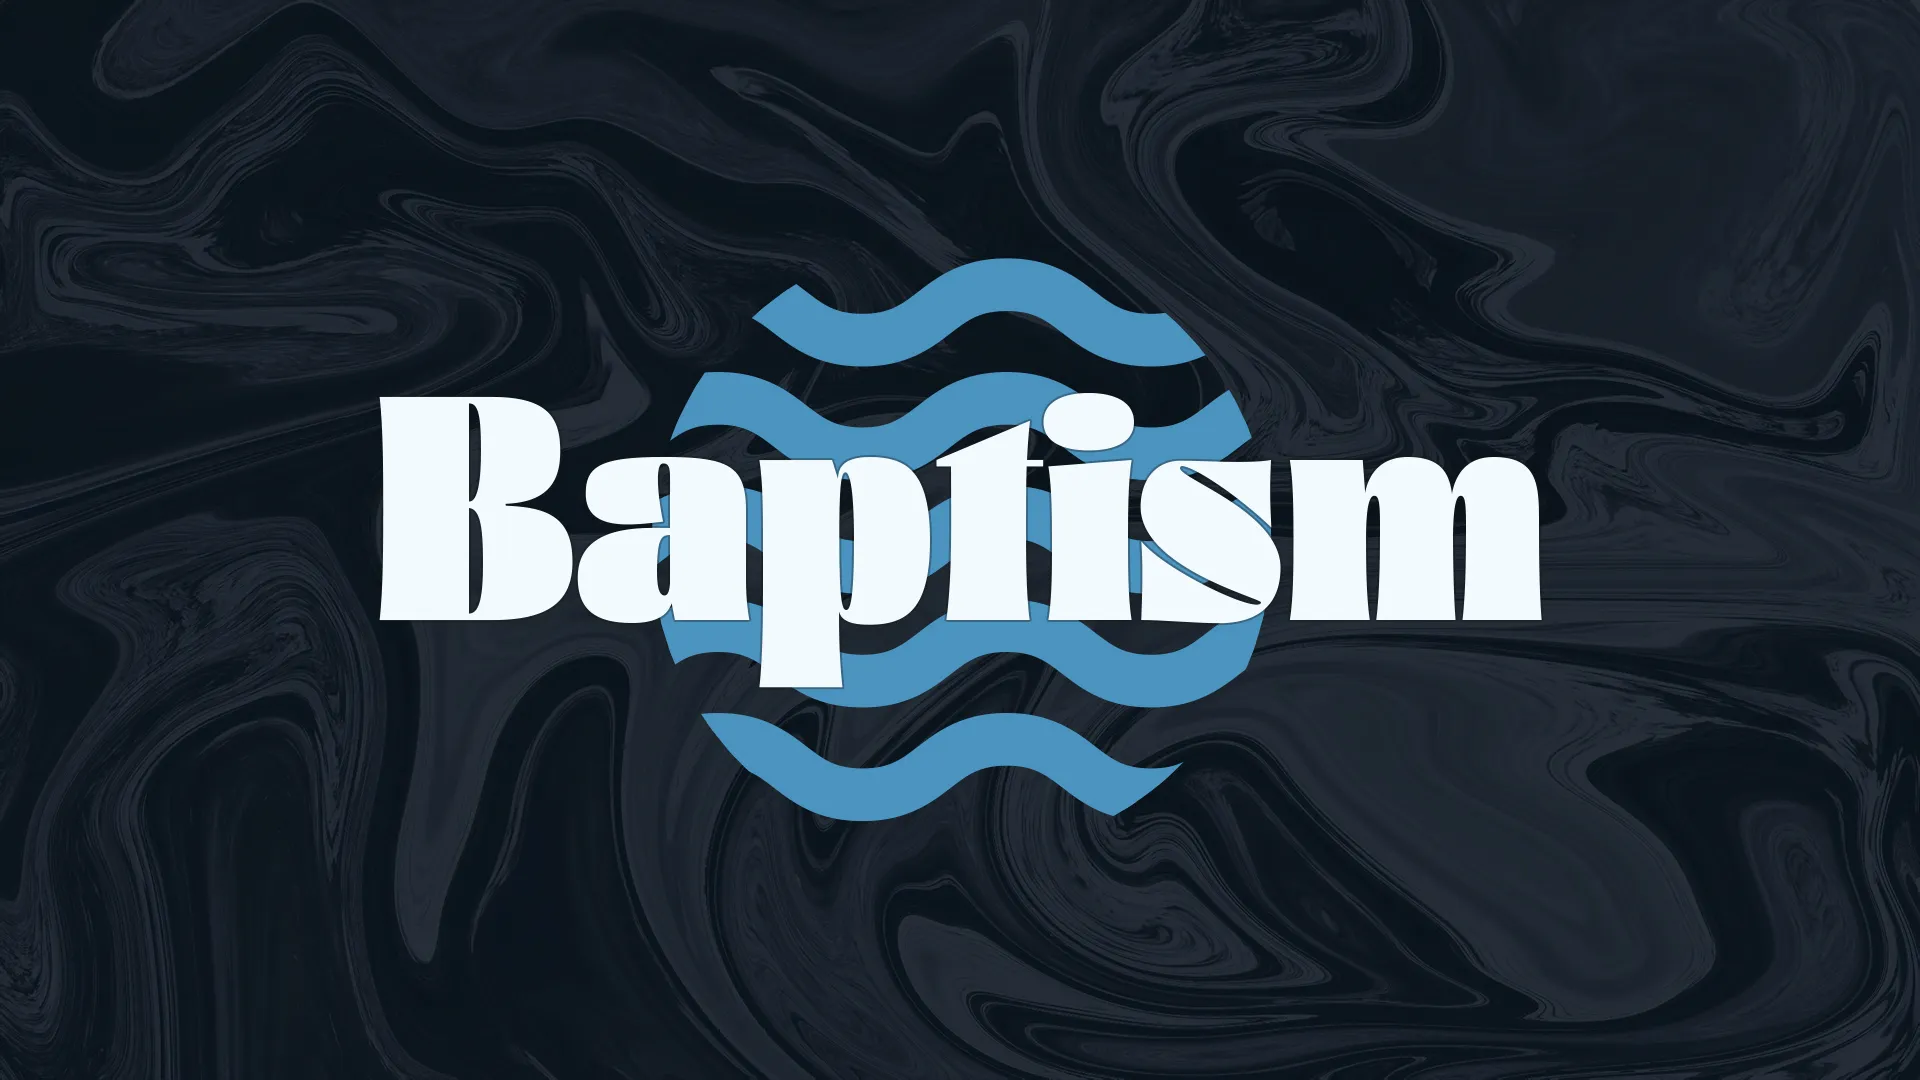 Dive into the sacred ceremony of baptism with this sleek and modern church media template. The flowing water symbol intertwined with bold typography stands out against the dark, marbled background, creating a powerful visual for this significant event.